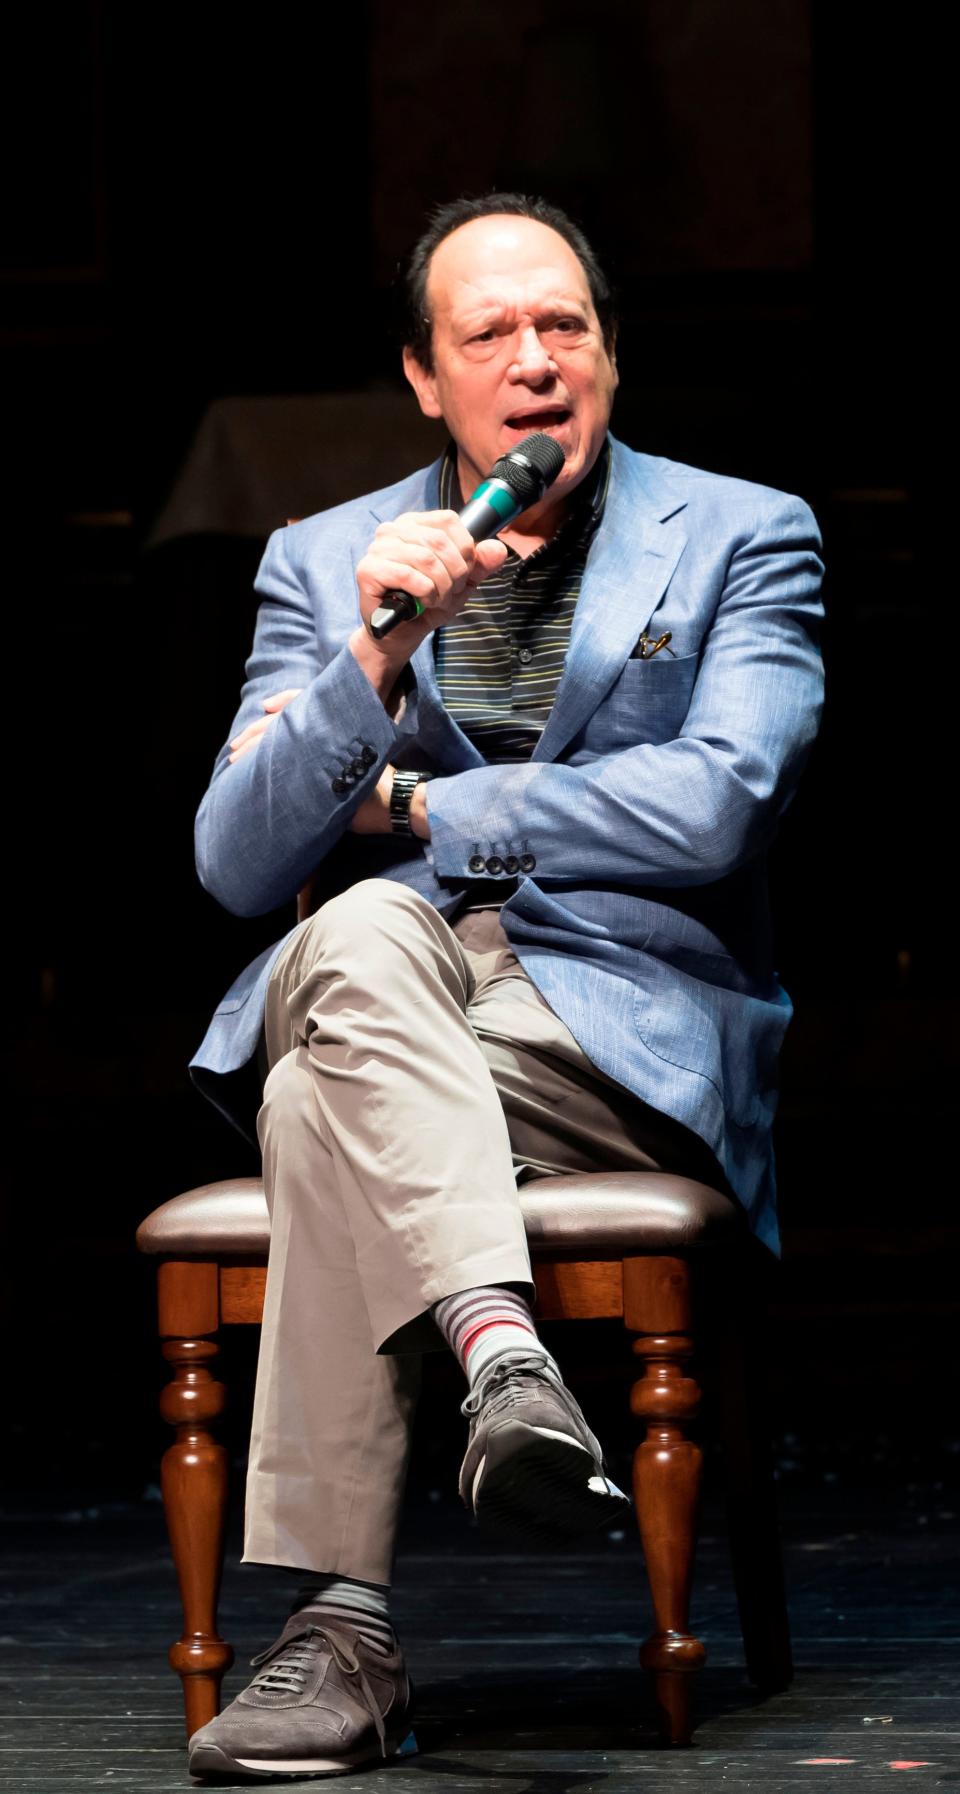 Playwright Ken Ludwig, author of “A Comedy of Tenors,” speaking during a program at Asolo Repertory Theatre in 2020.